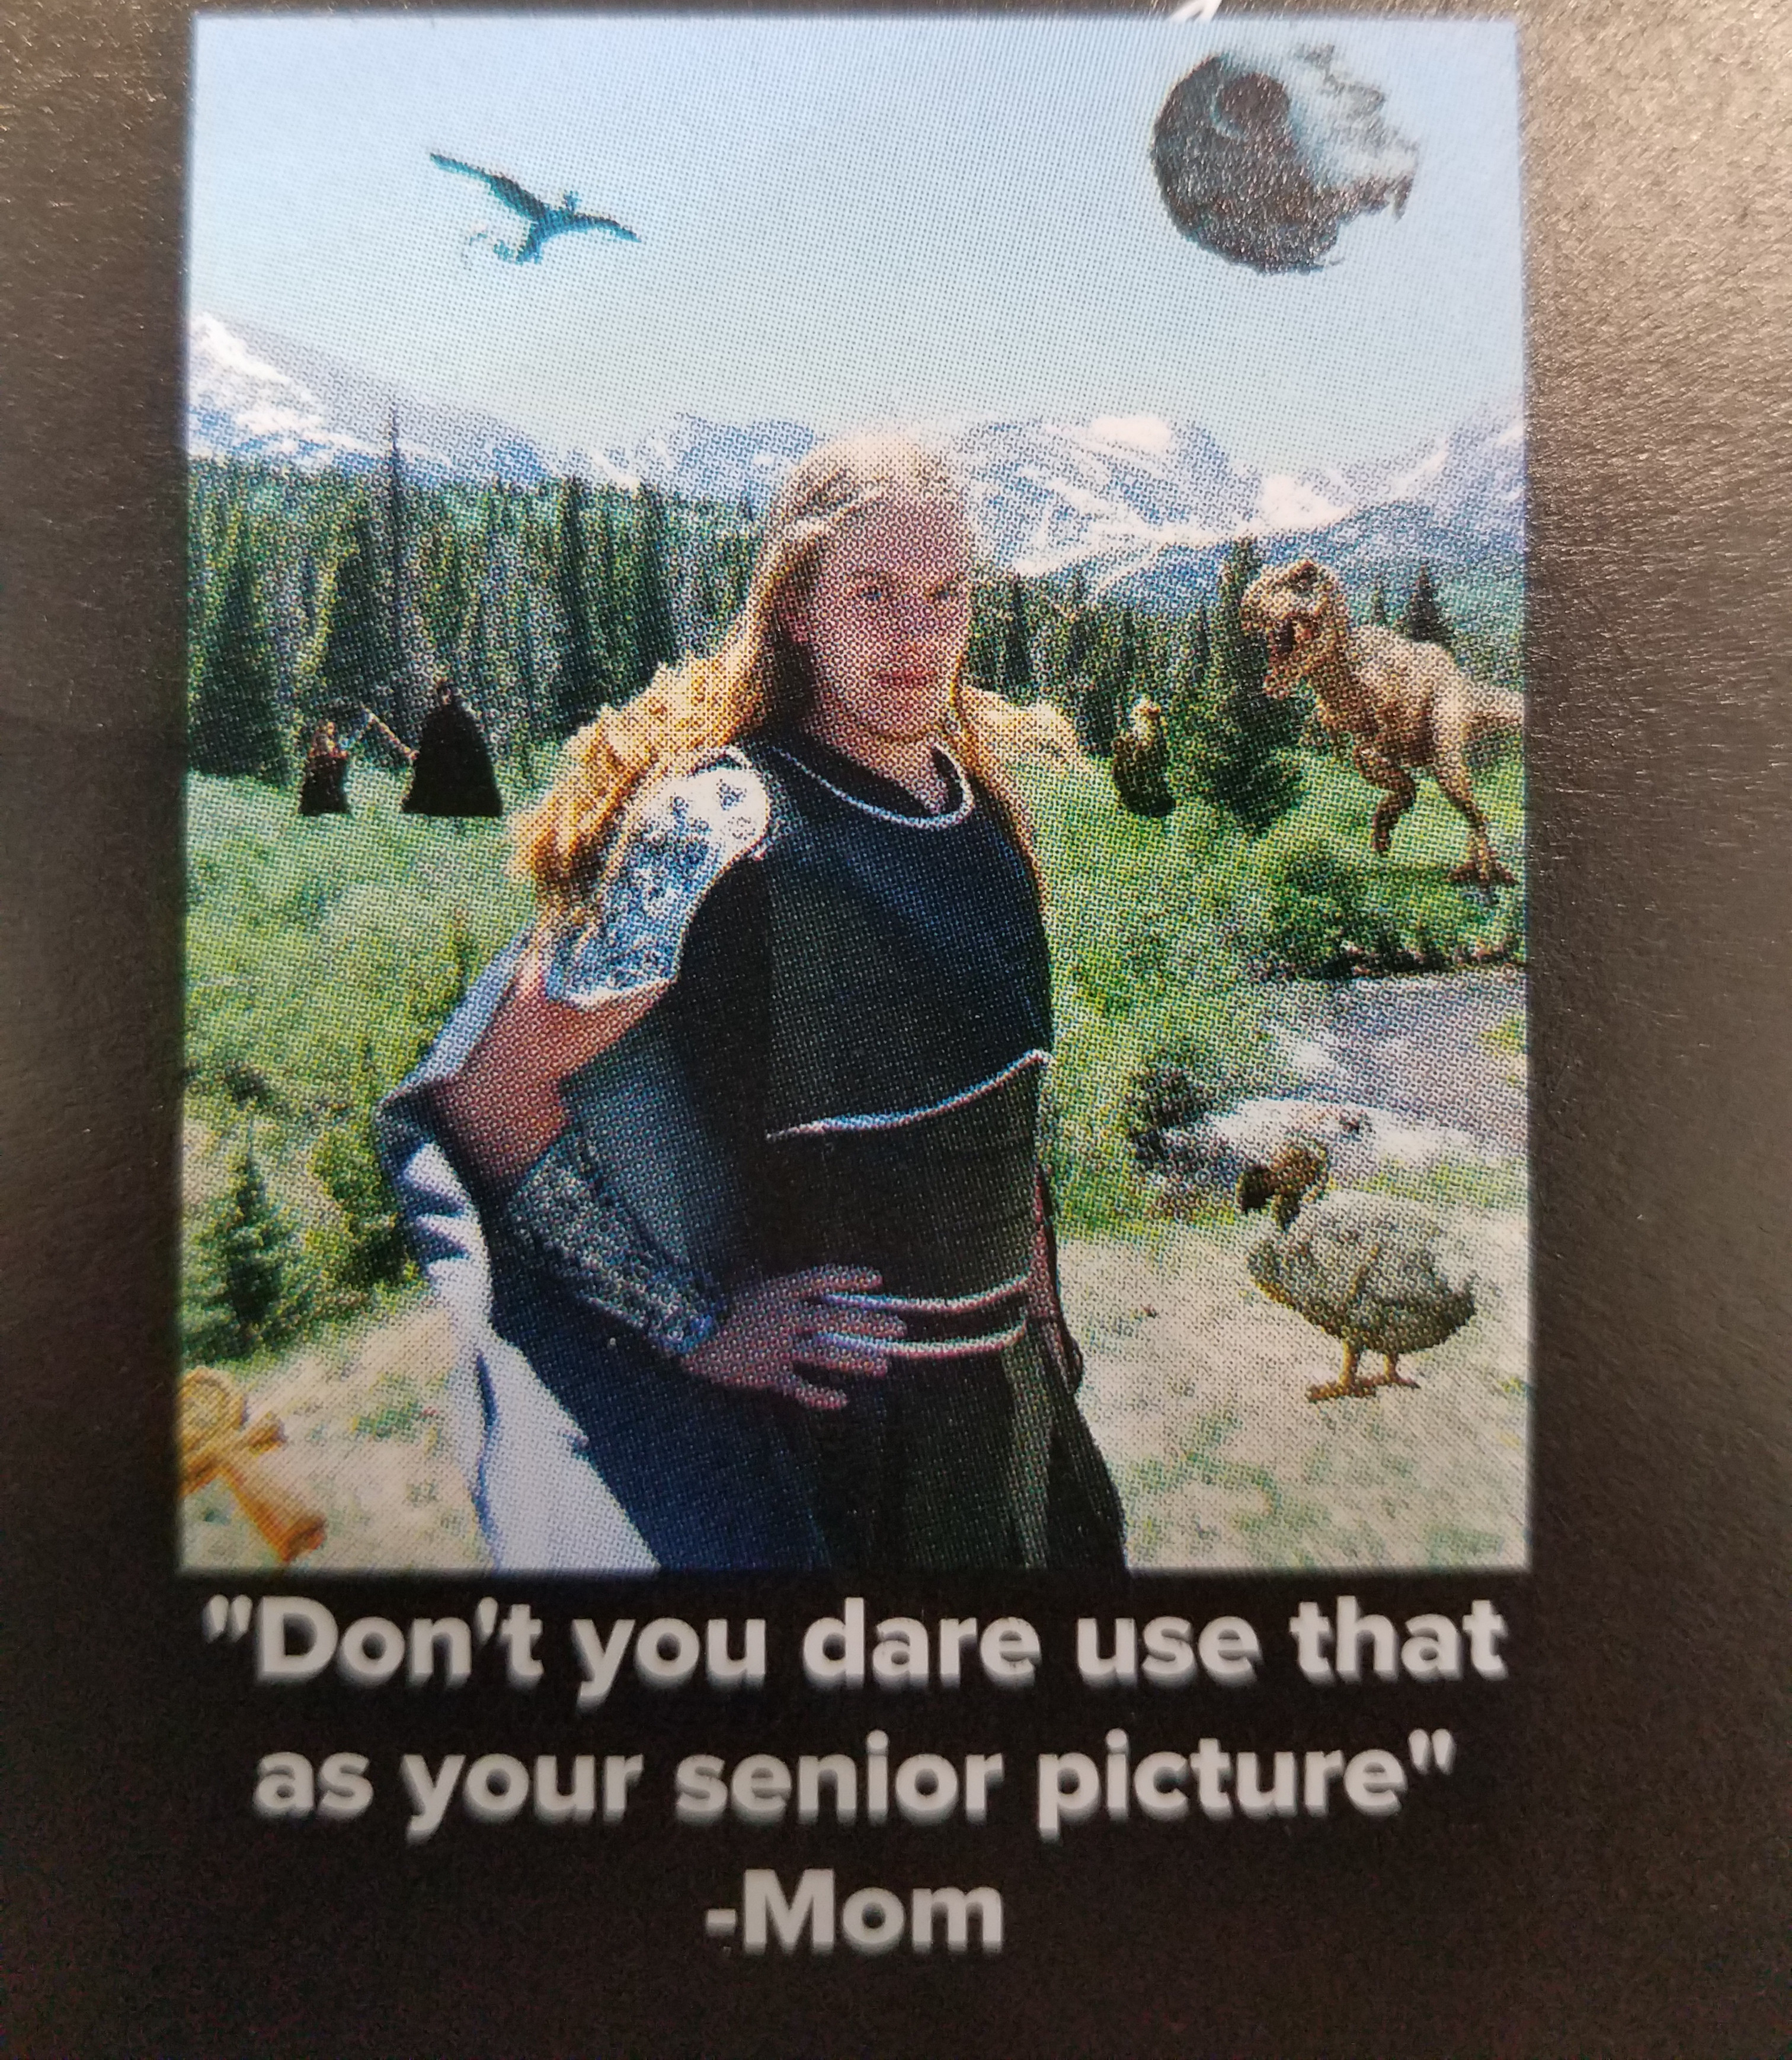 meme - don t you dare use that for your senior picture - "Don't you dare use that as your senior picture" Mom